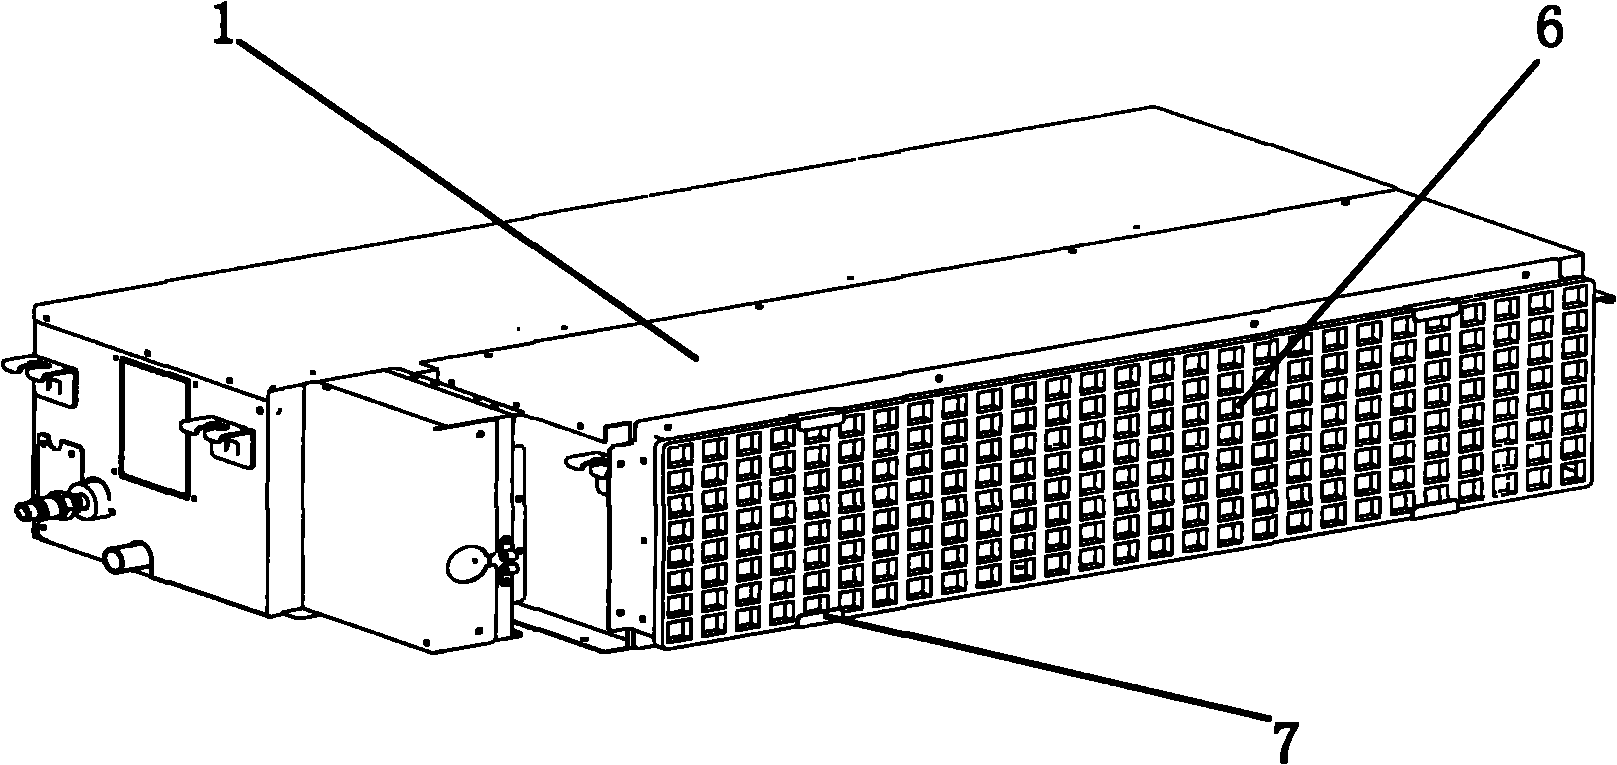 Filter screen structure of indoor unit of low-static pressure type air-conditioner